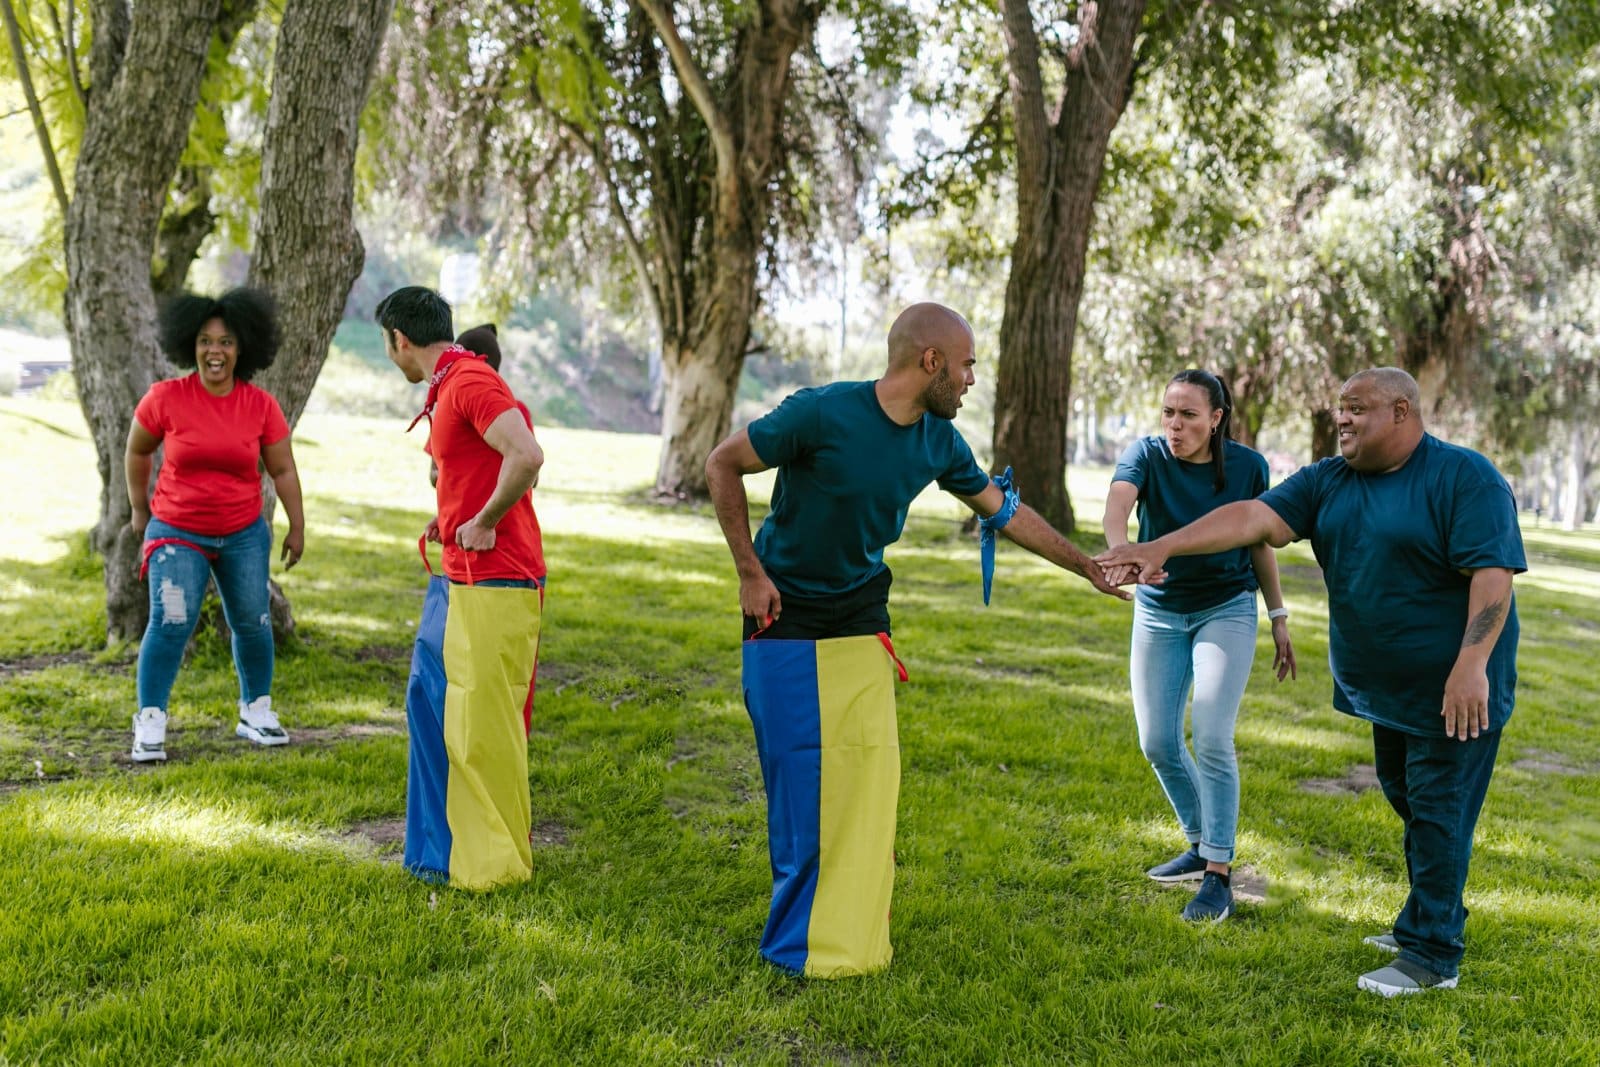 Image Credit: Pexel / RDNE Stock project <p><span>Sack races promote balance and coordination while also encouraging a spirited competitive atmosphere. This game is great for outdoor family gatherings and can lead to lots of laughter and joy.</span></p>